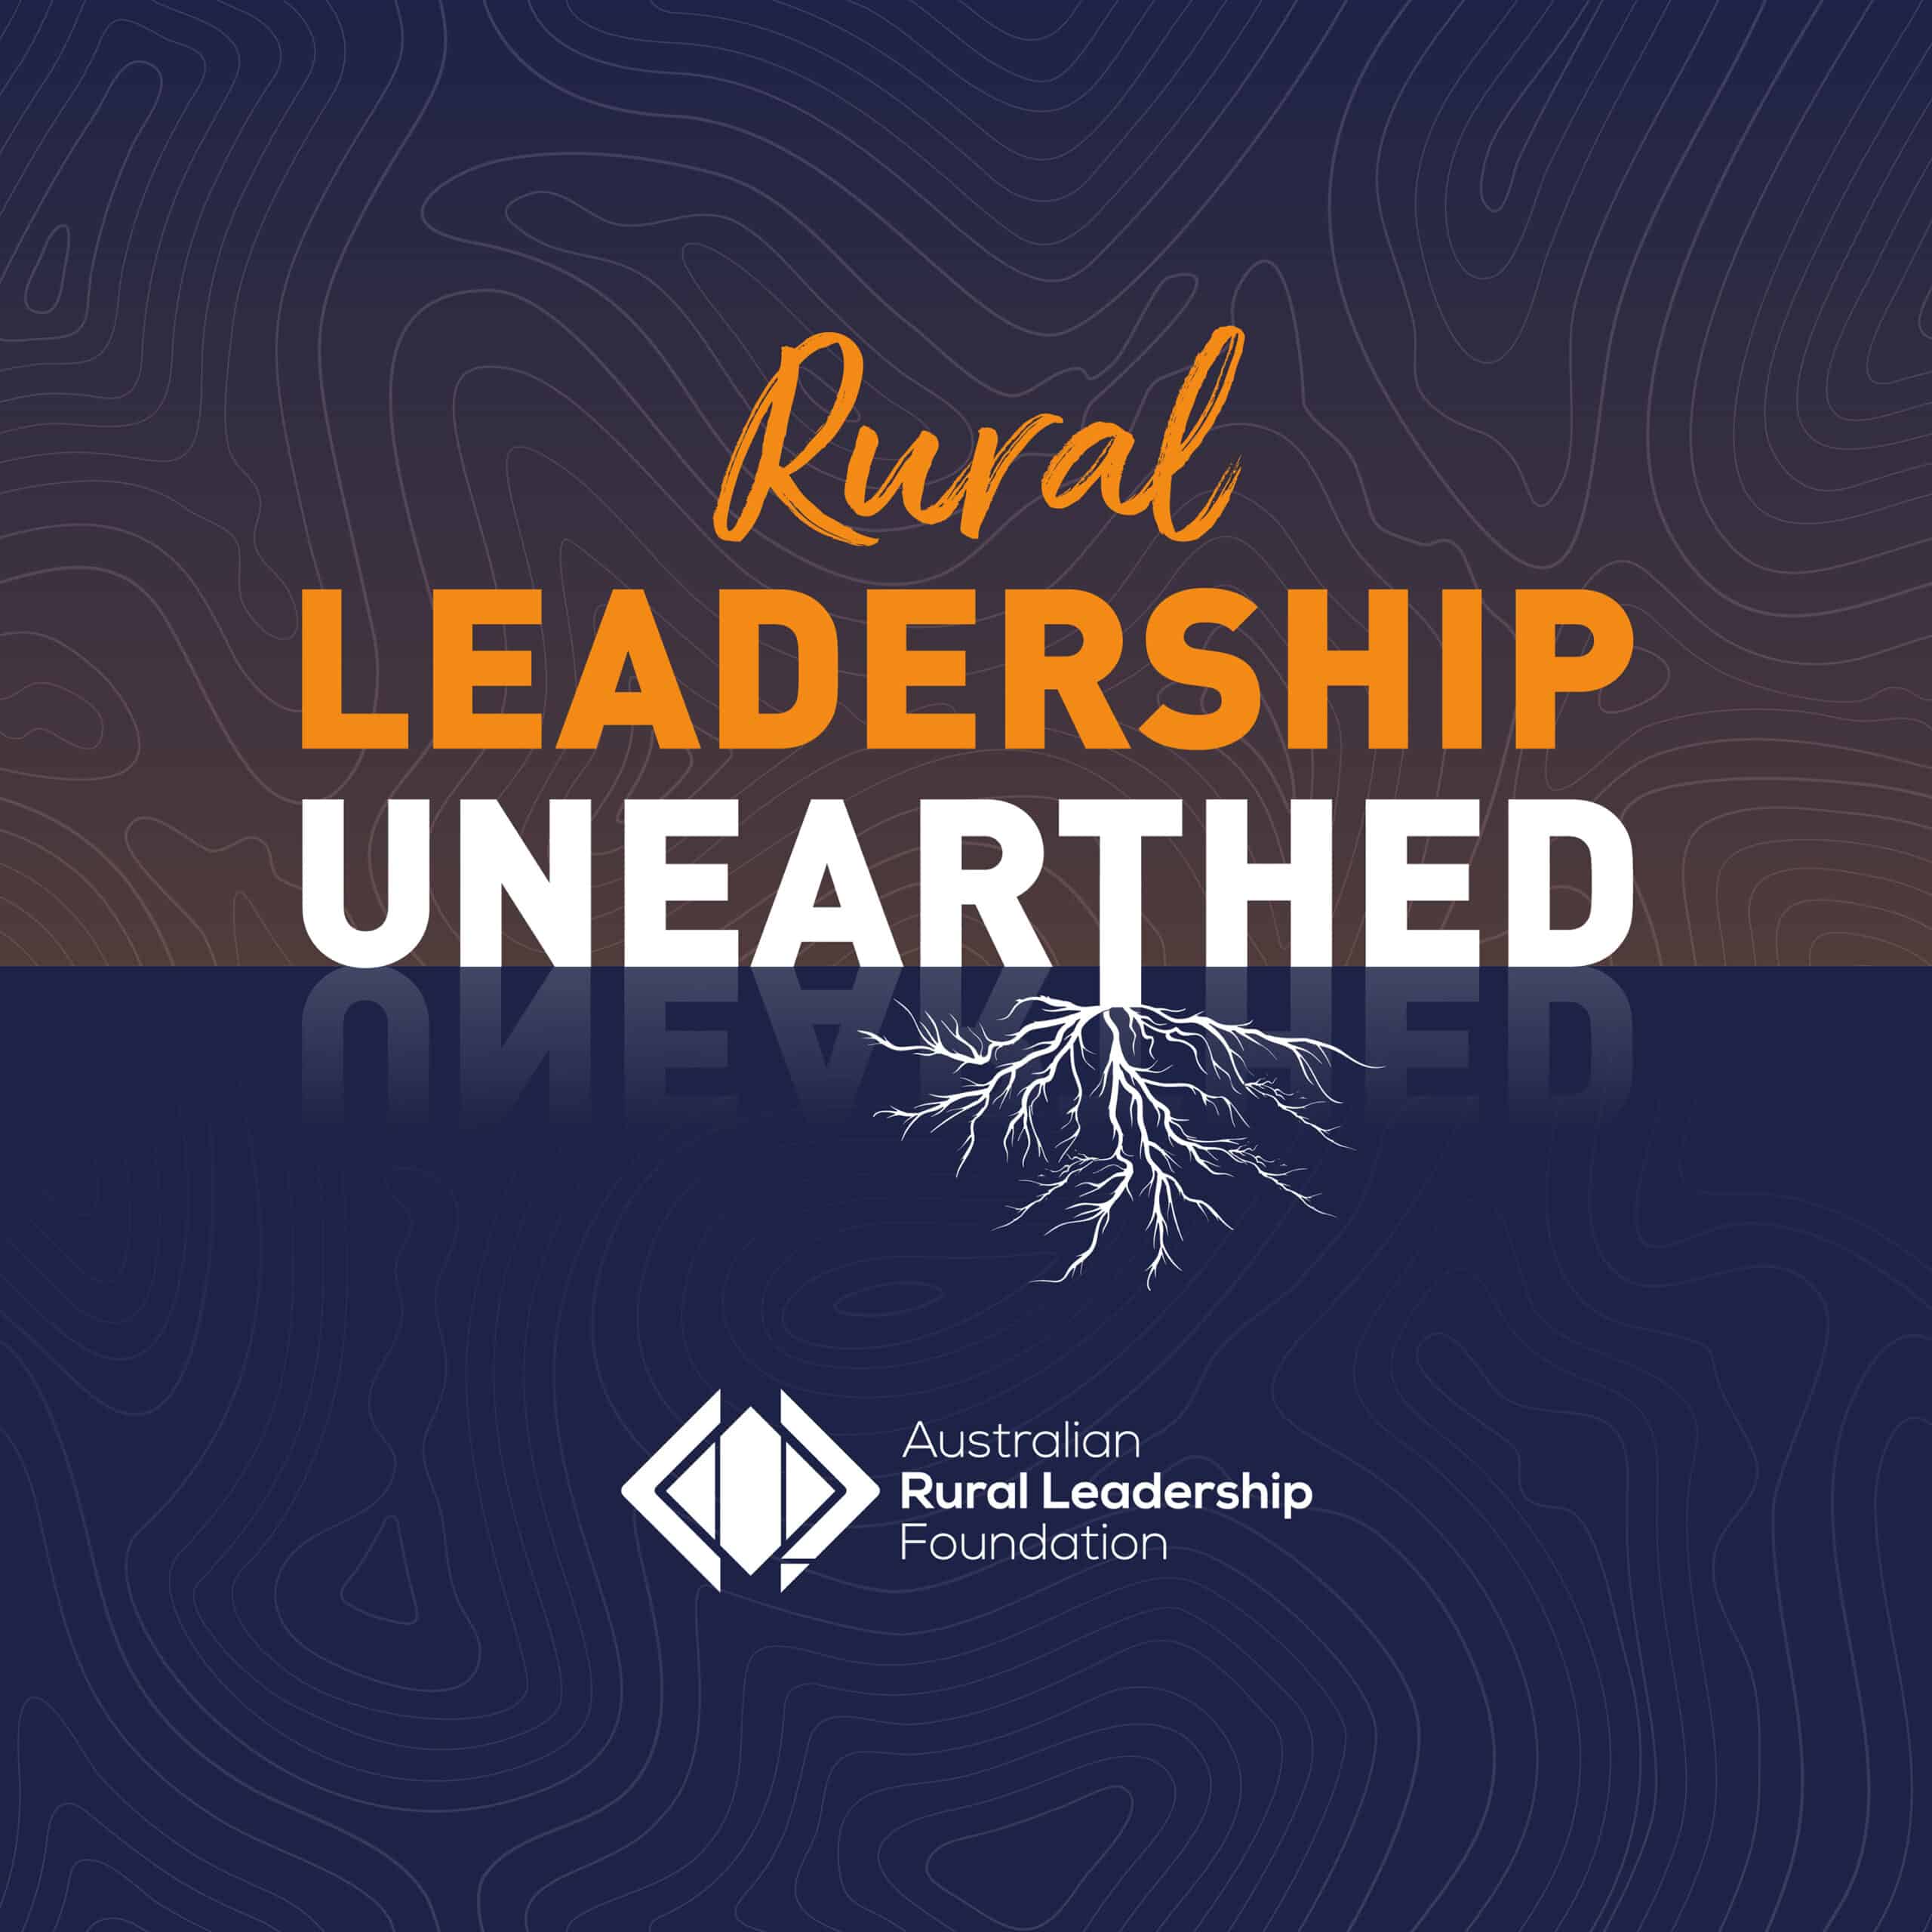 Rural Leadership Unearthed Podcast cover artwork